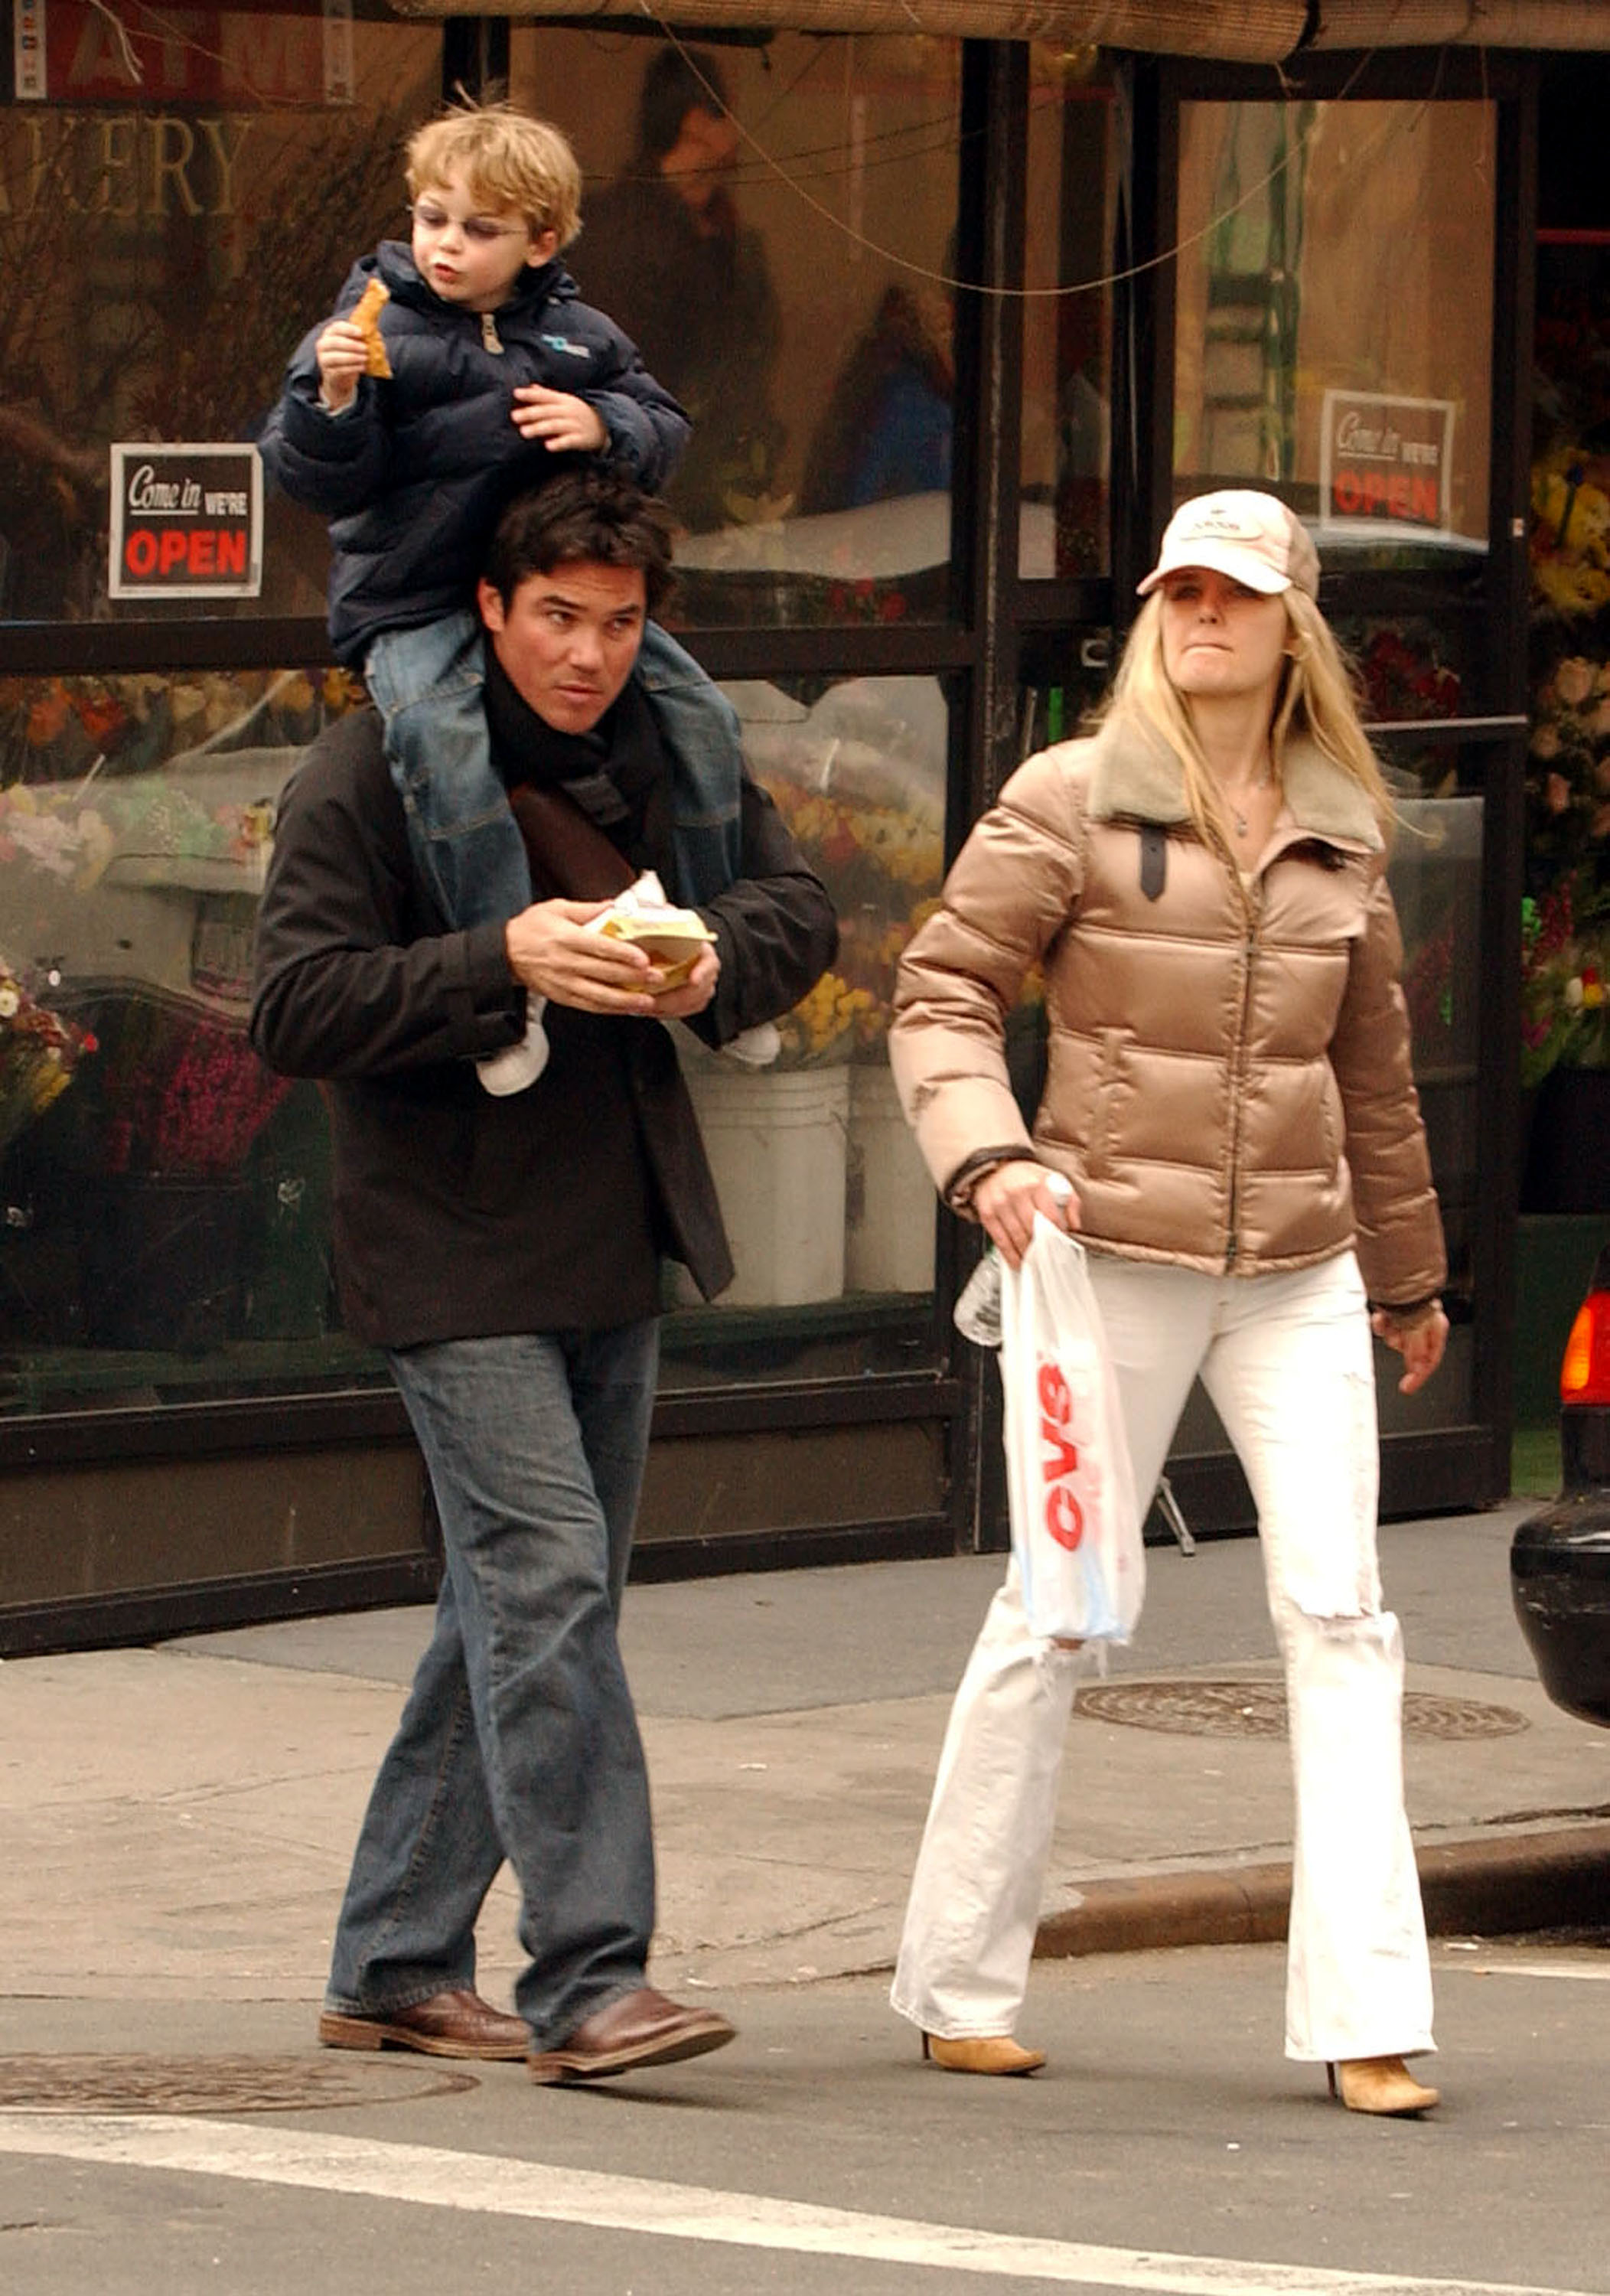 Dean Cain, his son Christopher, and the boy's mother Samantha Torres take a walk in the West Village in New York City on March 17, 2005 | Source: Getty Images